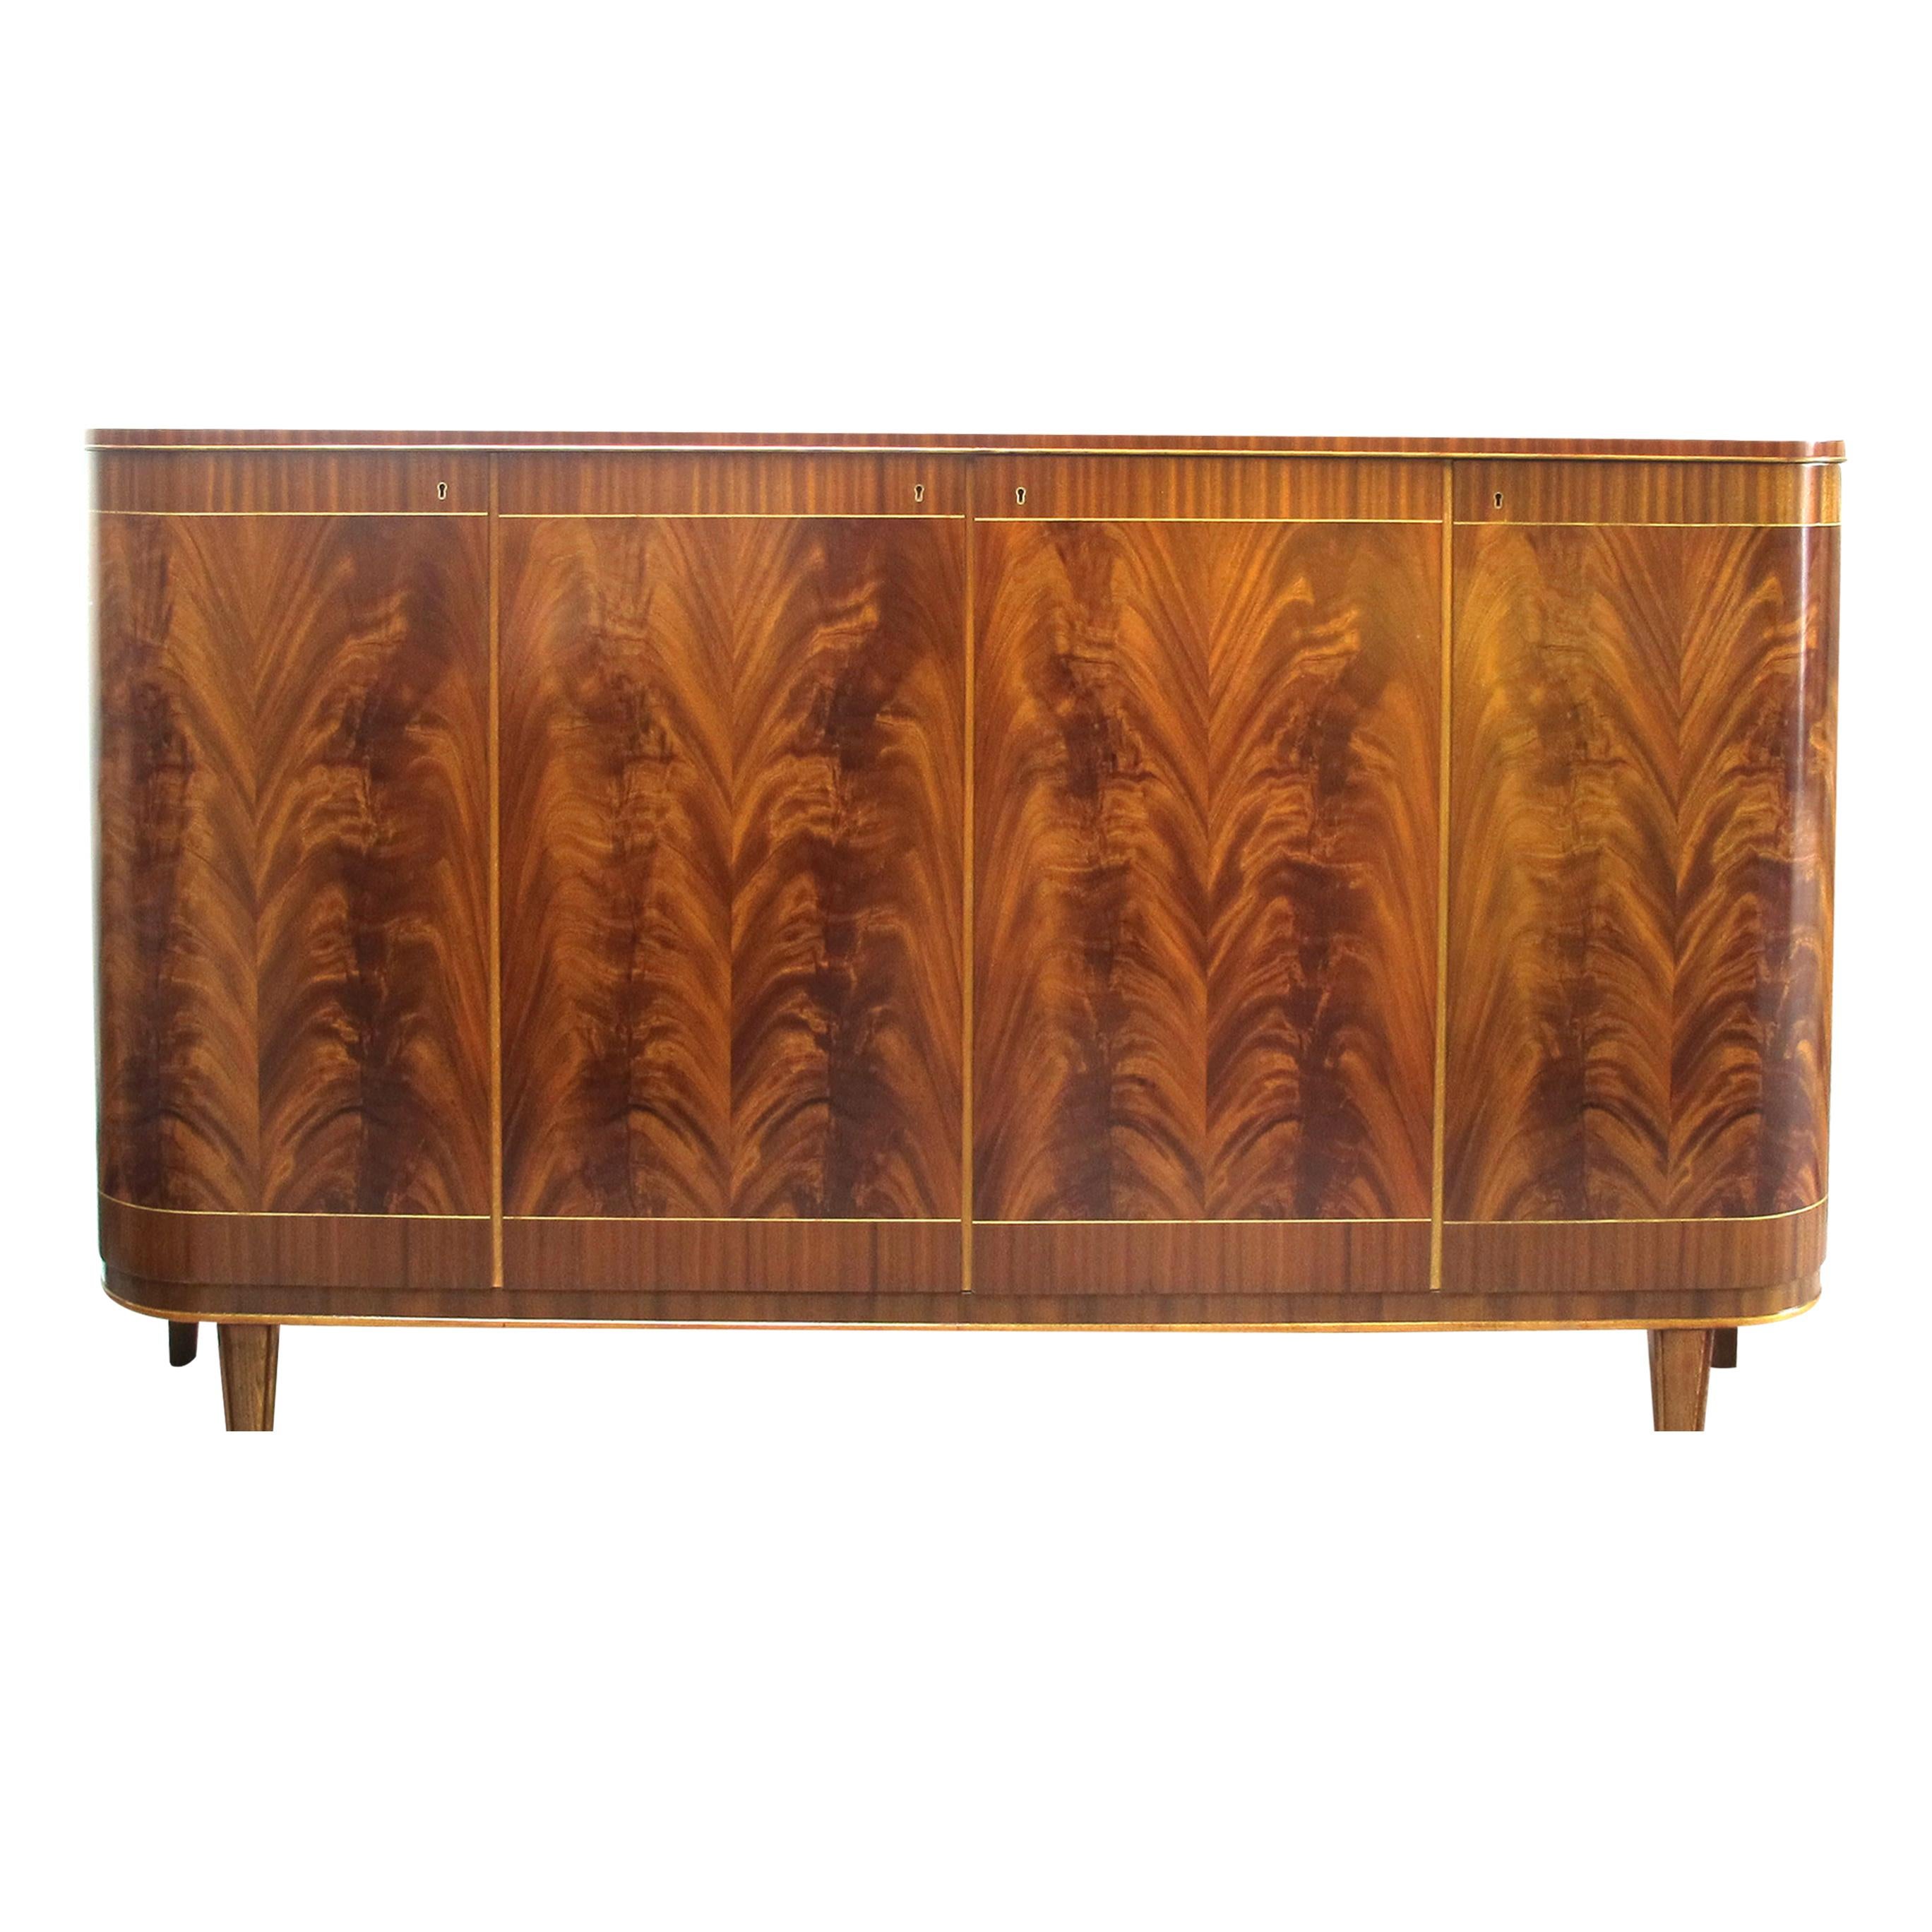 One of the first things that catch the eye is the sideboard's distinctive curved edges, which add a touch of sophistication to its overall appearance. The use of Cuban Mahogany with beautiful flame patterns on the front doors imparts a touch of